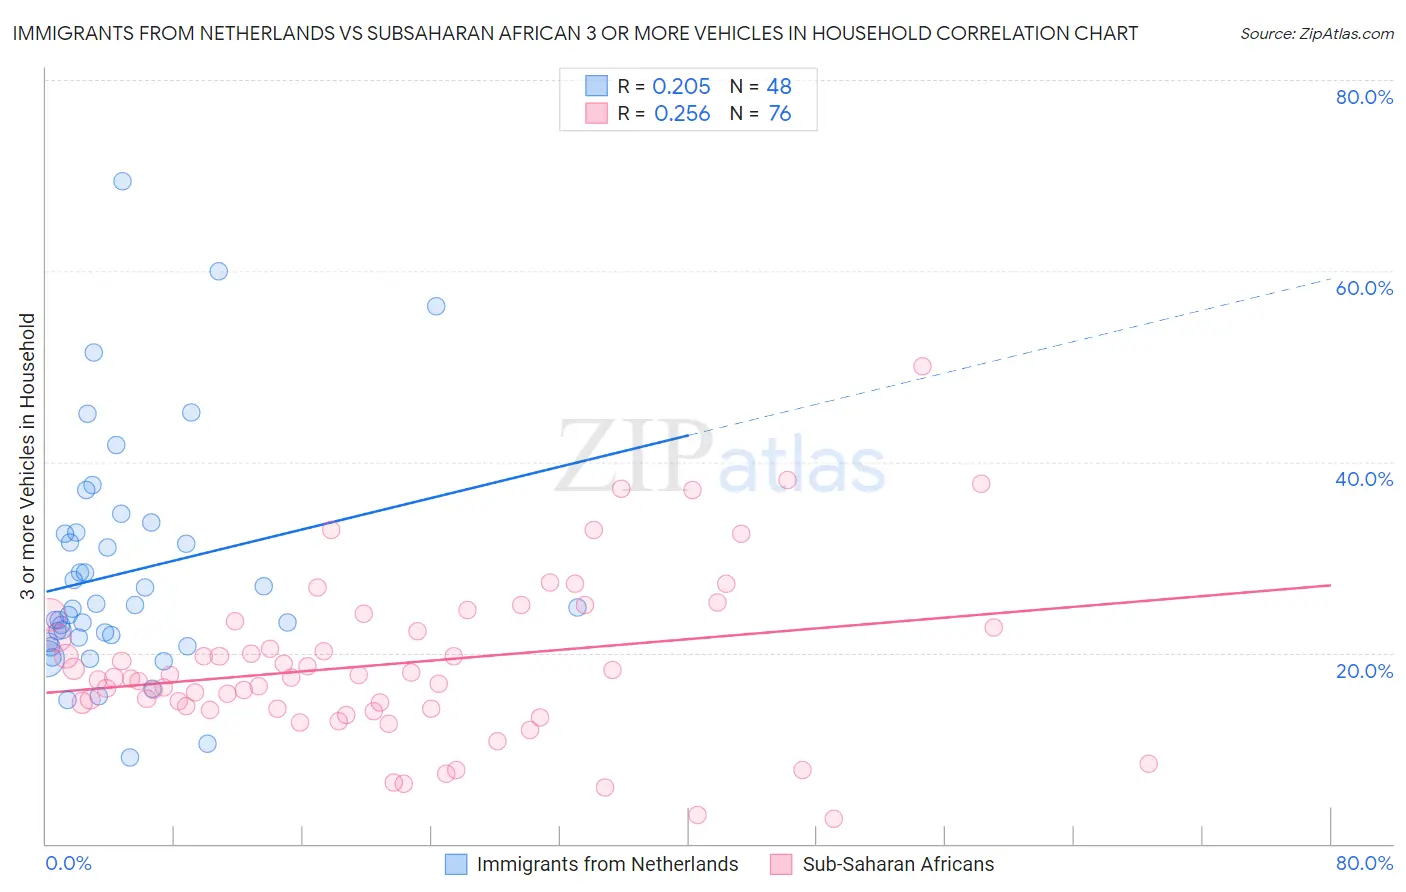 Immigrants from Netherlands vs Subsaharan African 3 or more Vehicles in Household